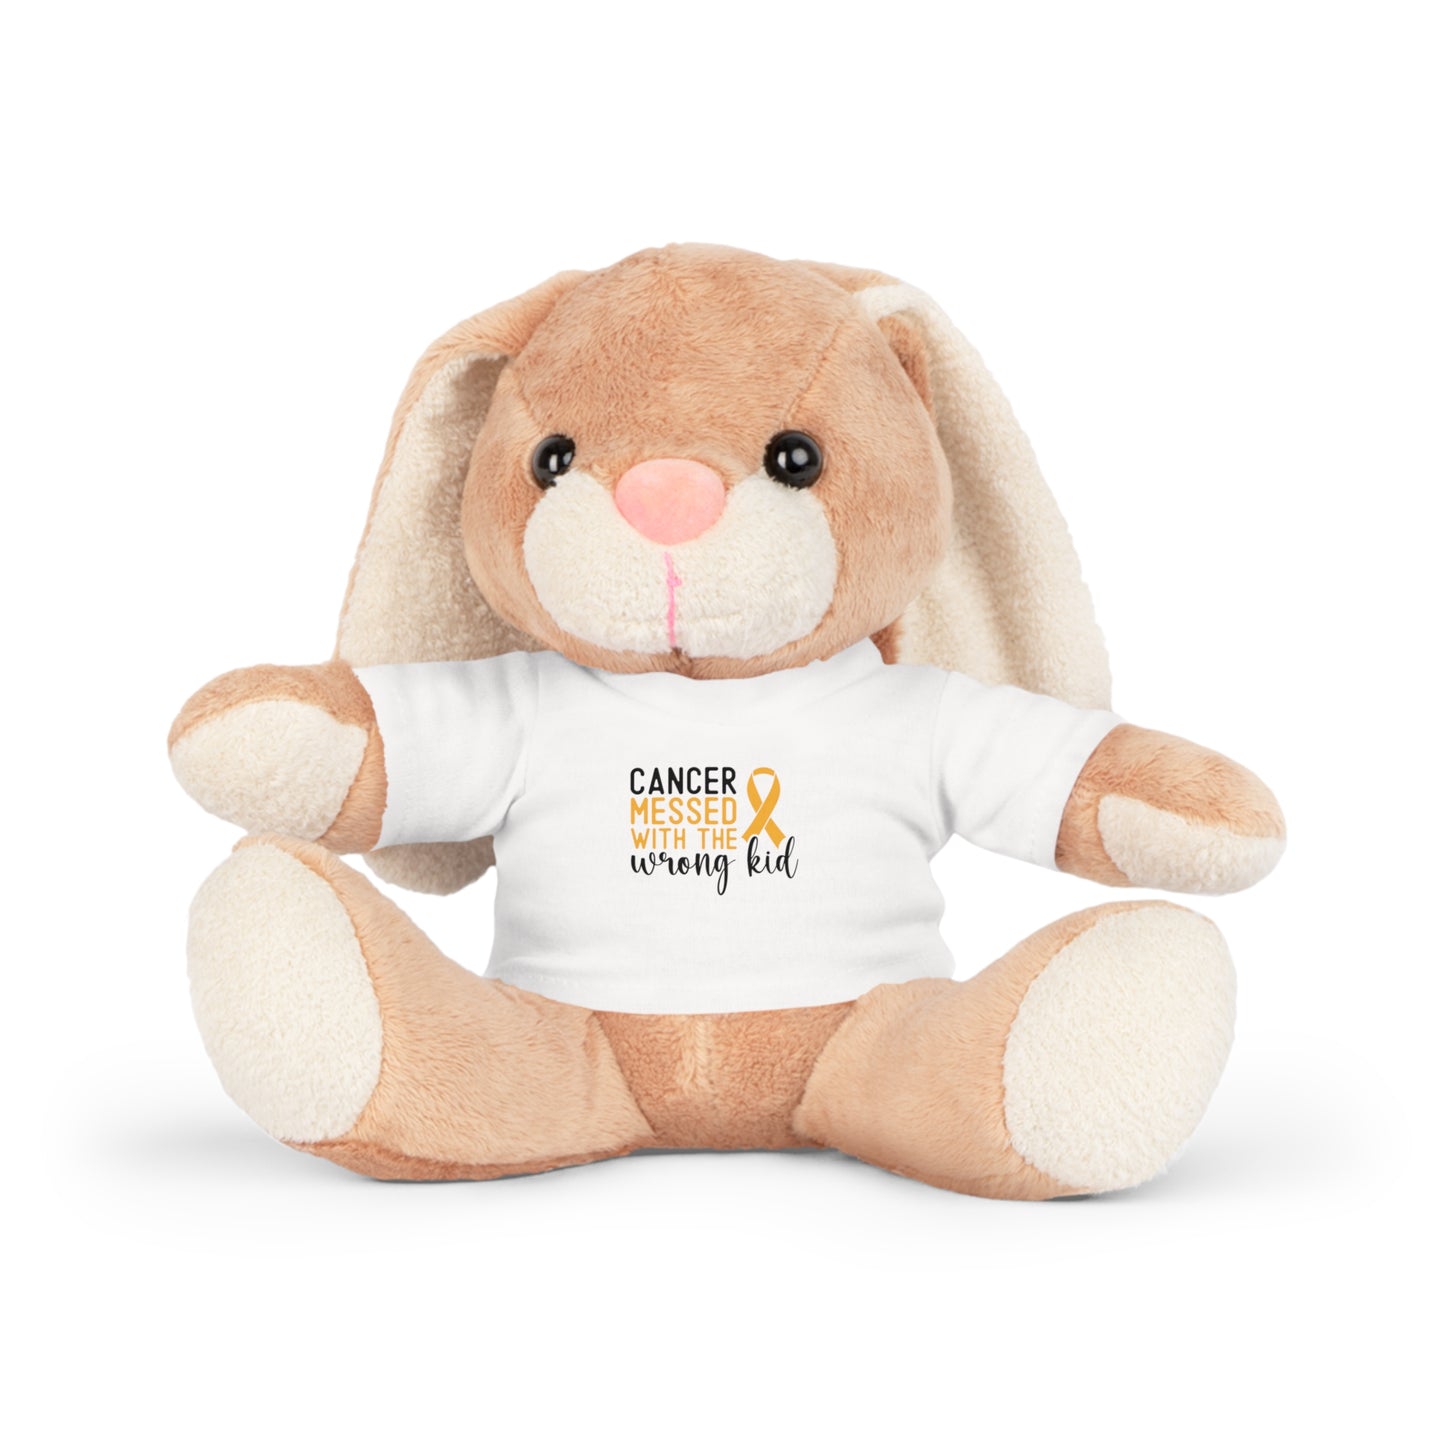 Childhood Cancer awareness - Plush Toy with T-Shirt